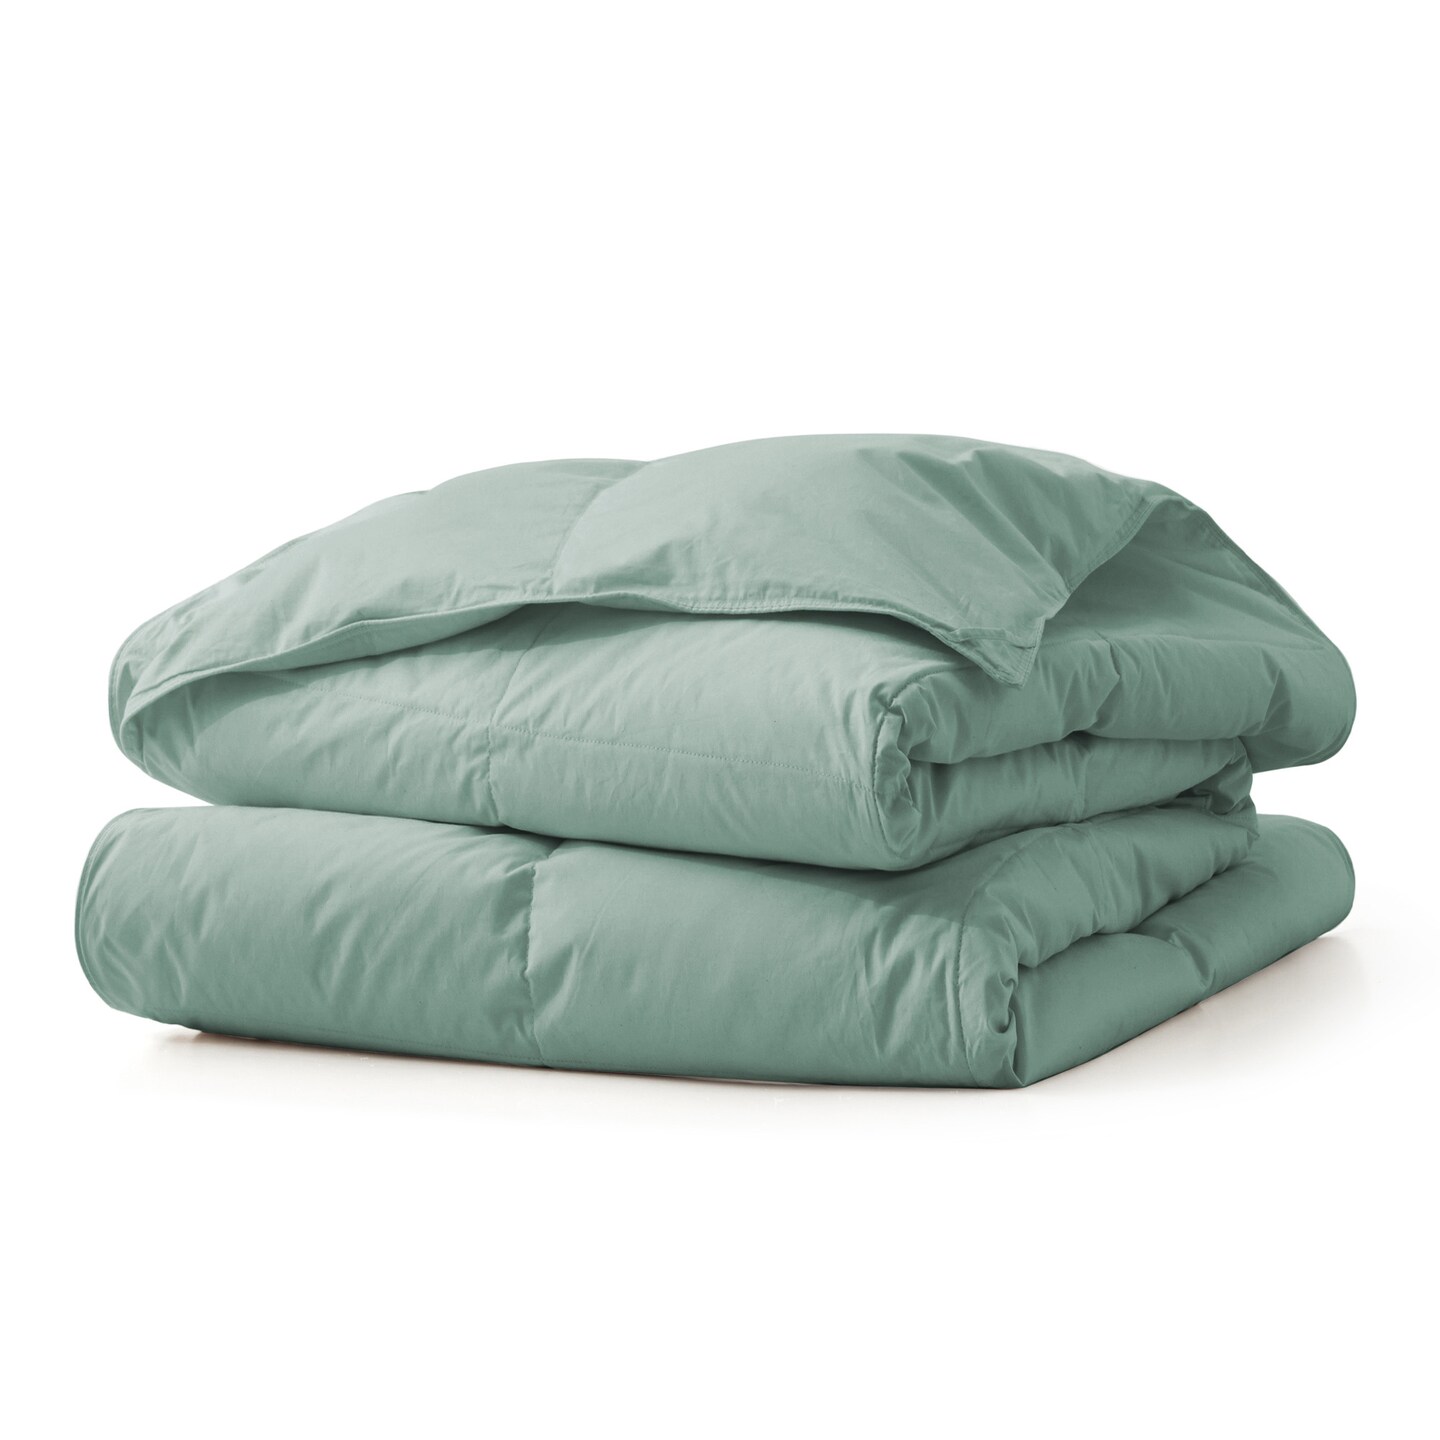 Peace Nest Premium Lightweight Organic Cotton Comforter with Down and Feather Fiber Fill - Perfect for Summer